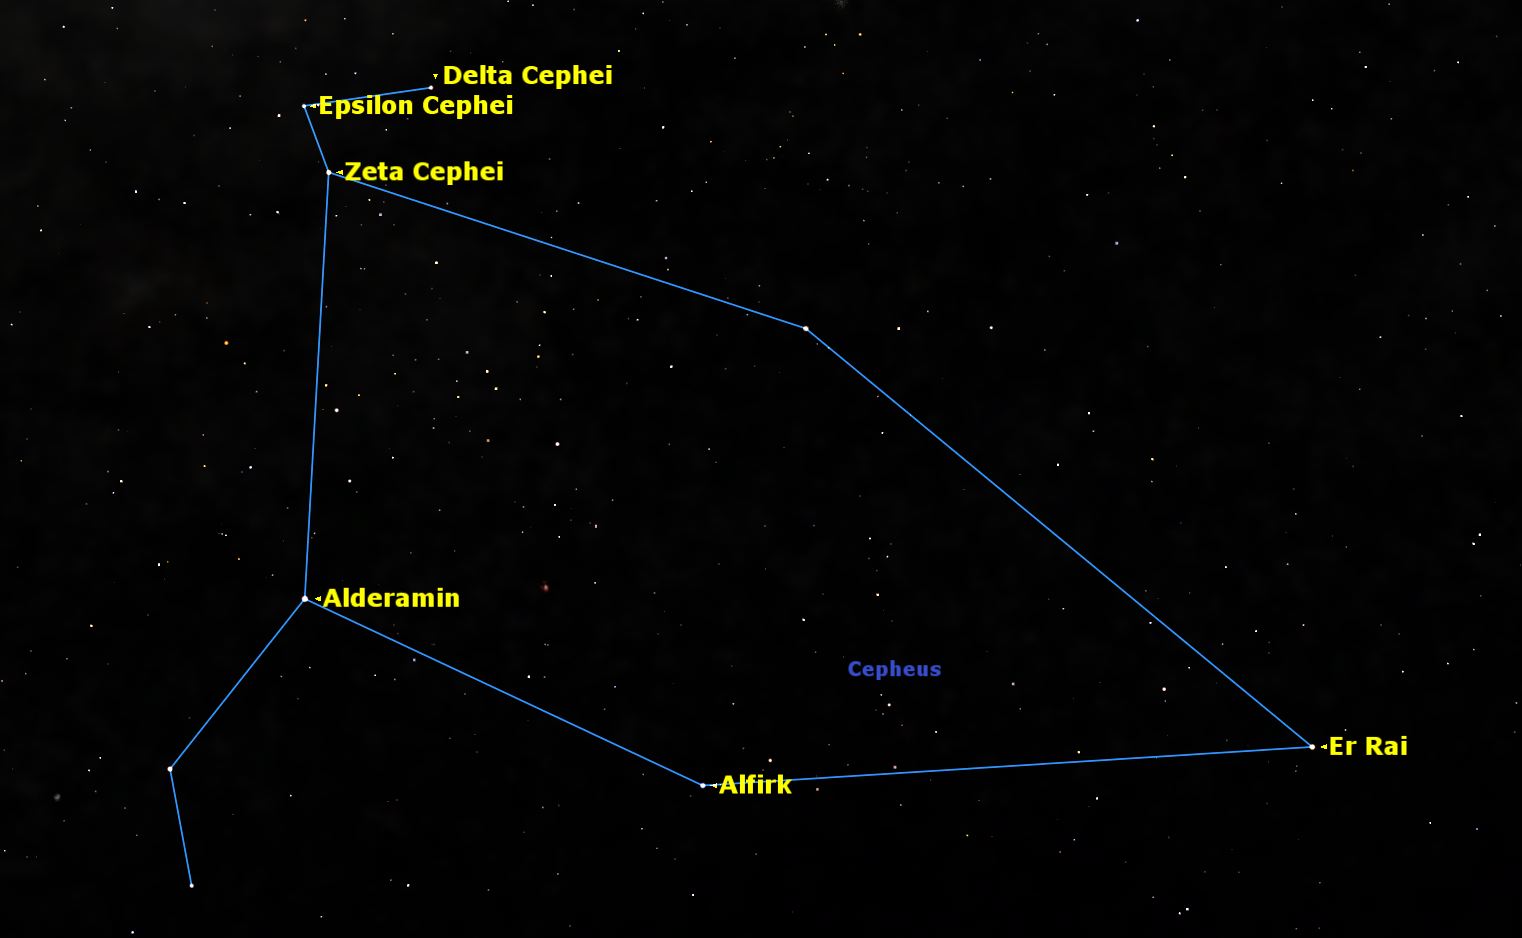 Delta Cephei gives its name to the Cepheid class of short period variable stars, used as a cosmic yardstick for measuring astronomical distances. Credit: Starry Night Software.